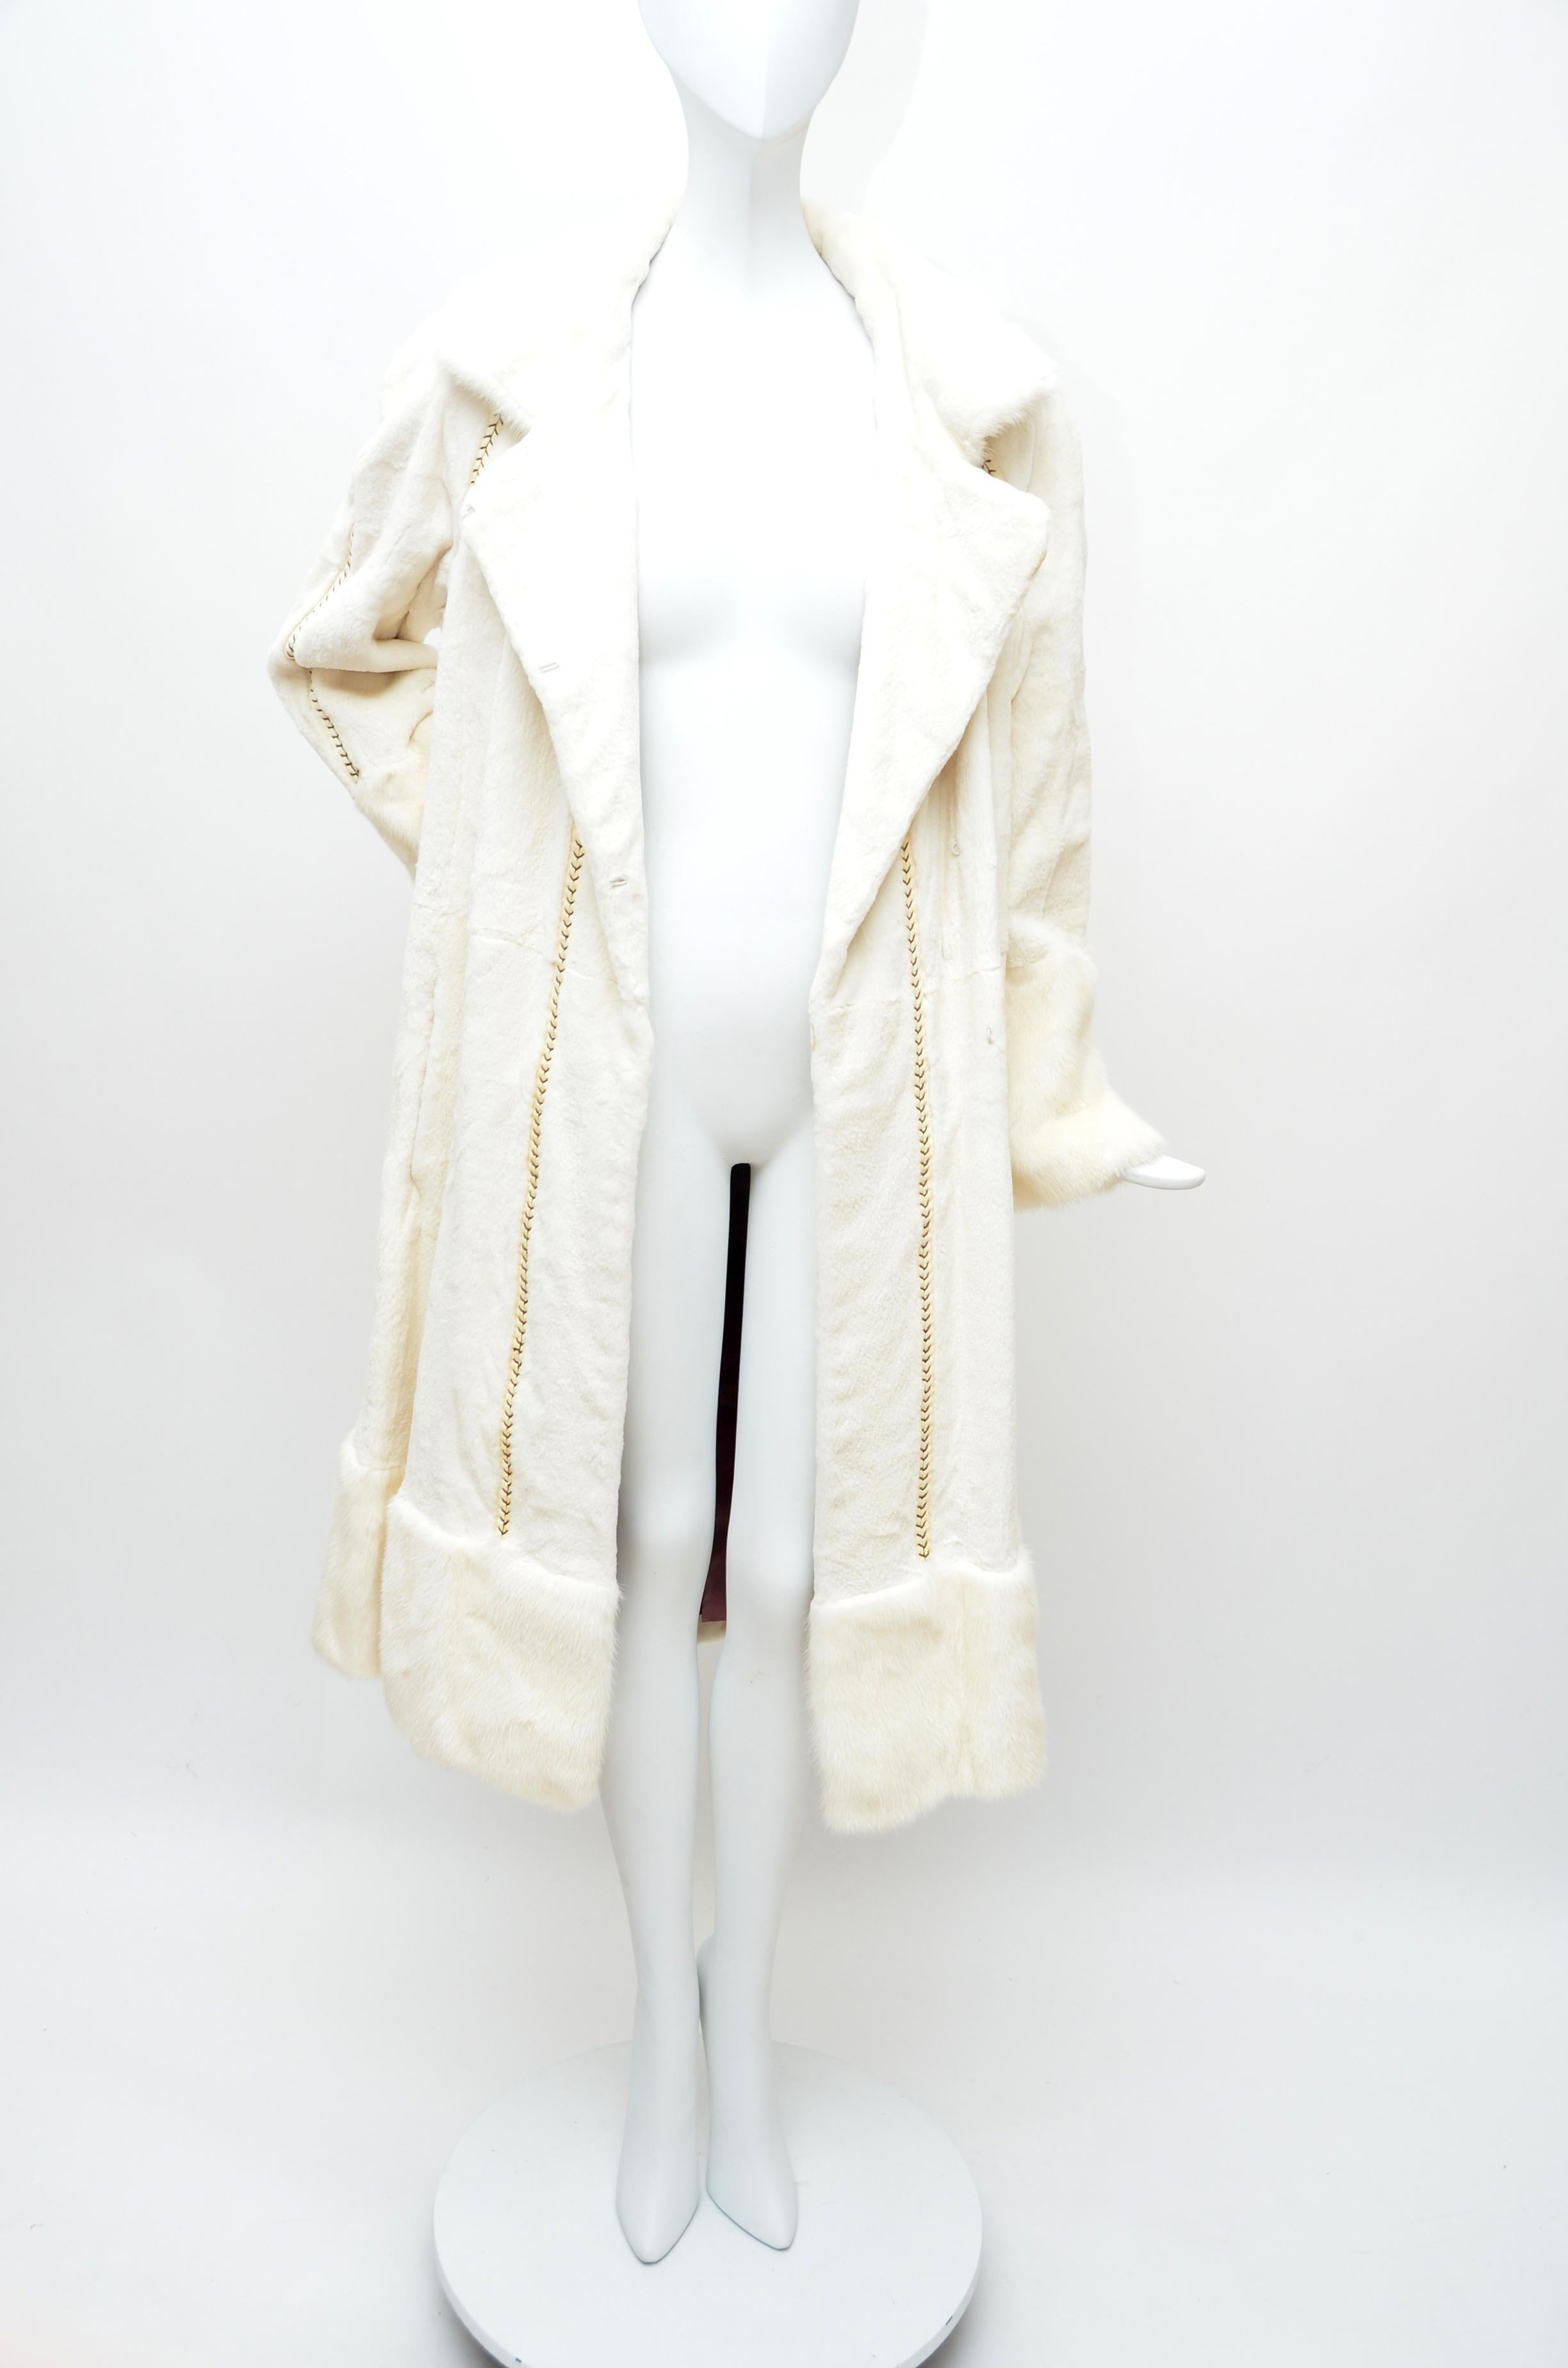 FENDI Mink Off White Coat  NEW With Tags   SZ 44  Retailed $21, 000 3